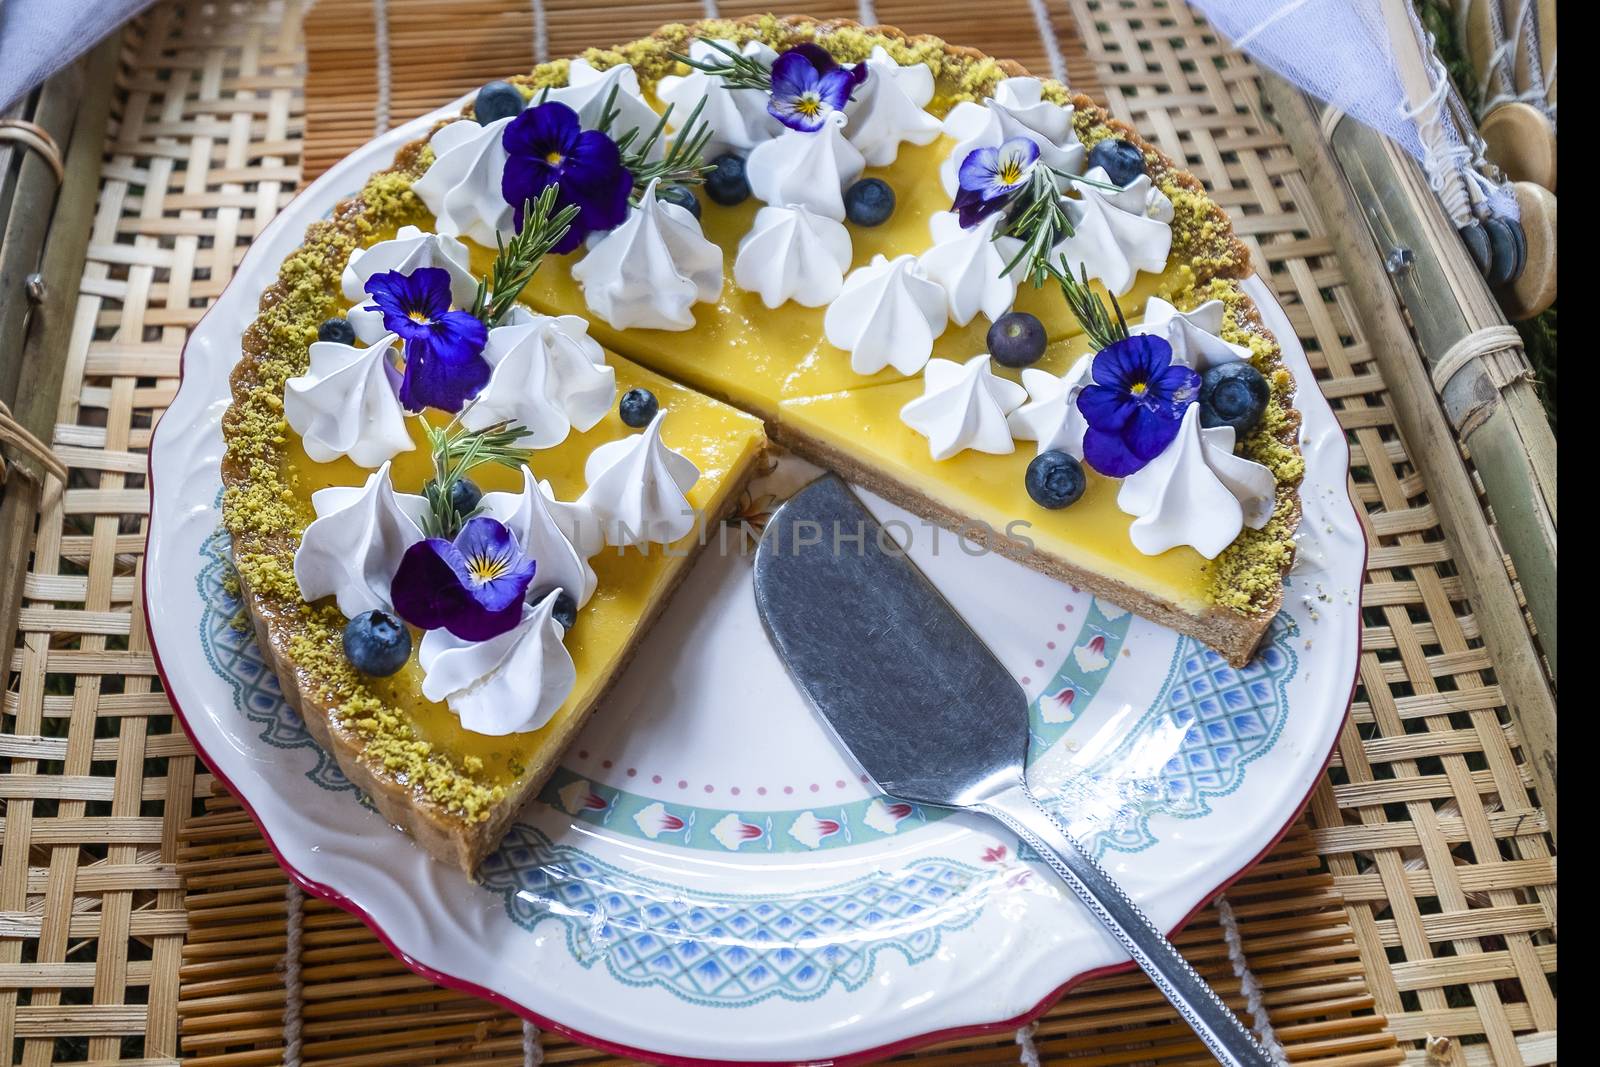 Homemade lemon pie topped with creamy white meringue, blueberries, rosemary sprigs and blue flowers. Rustic background.